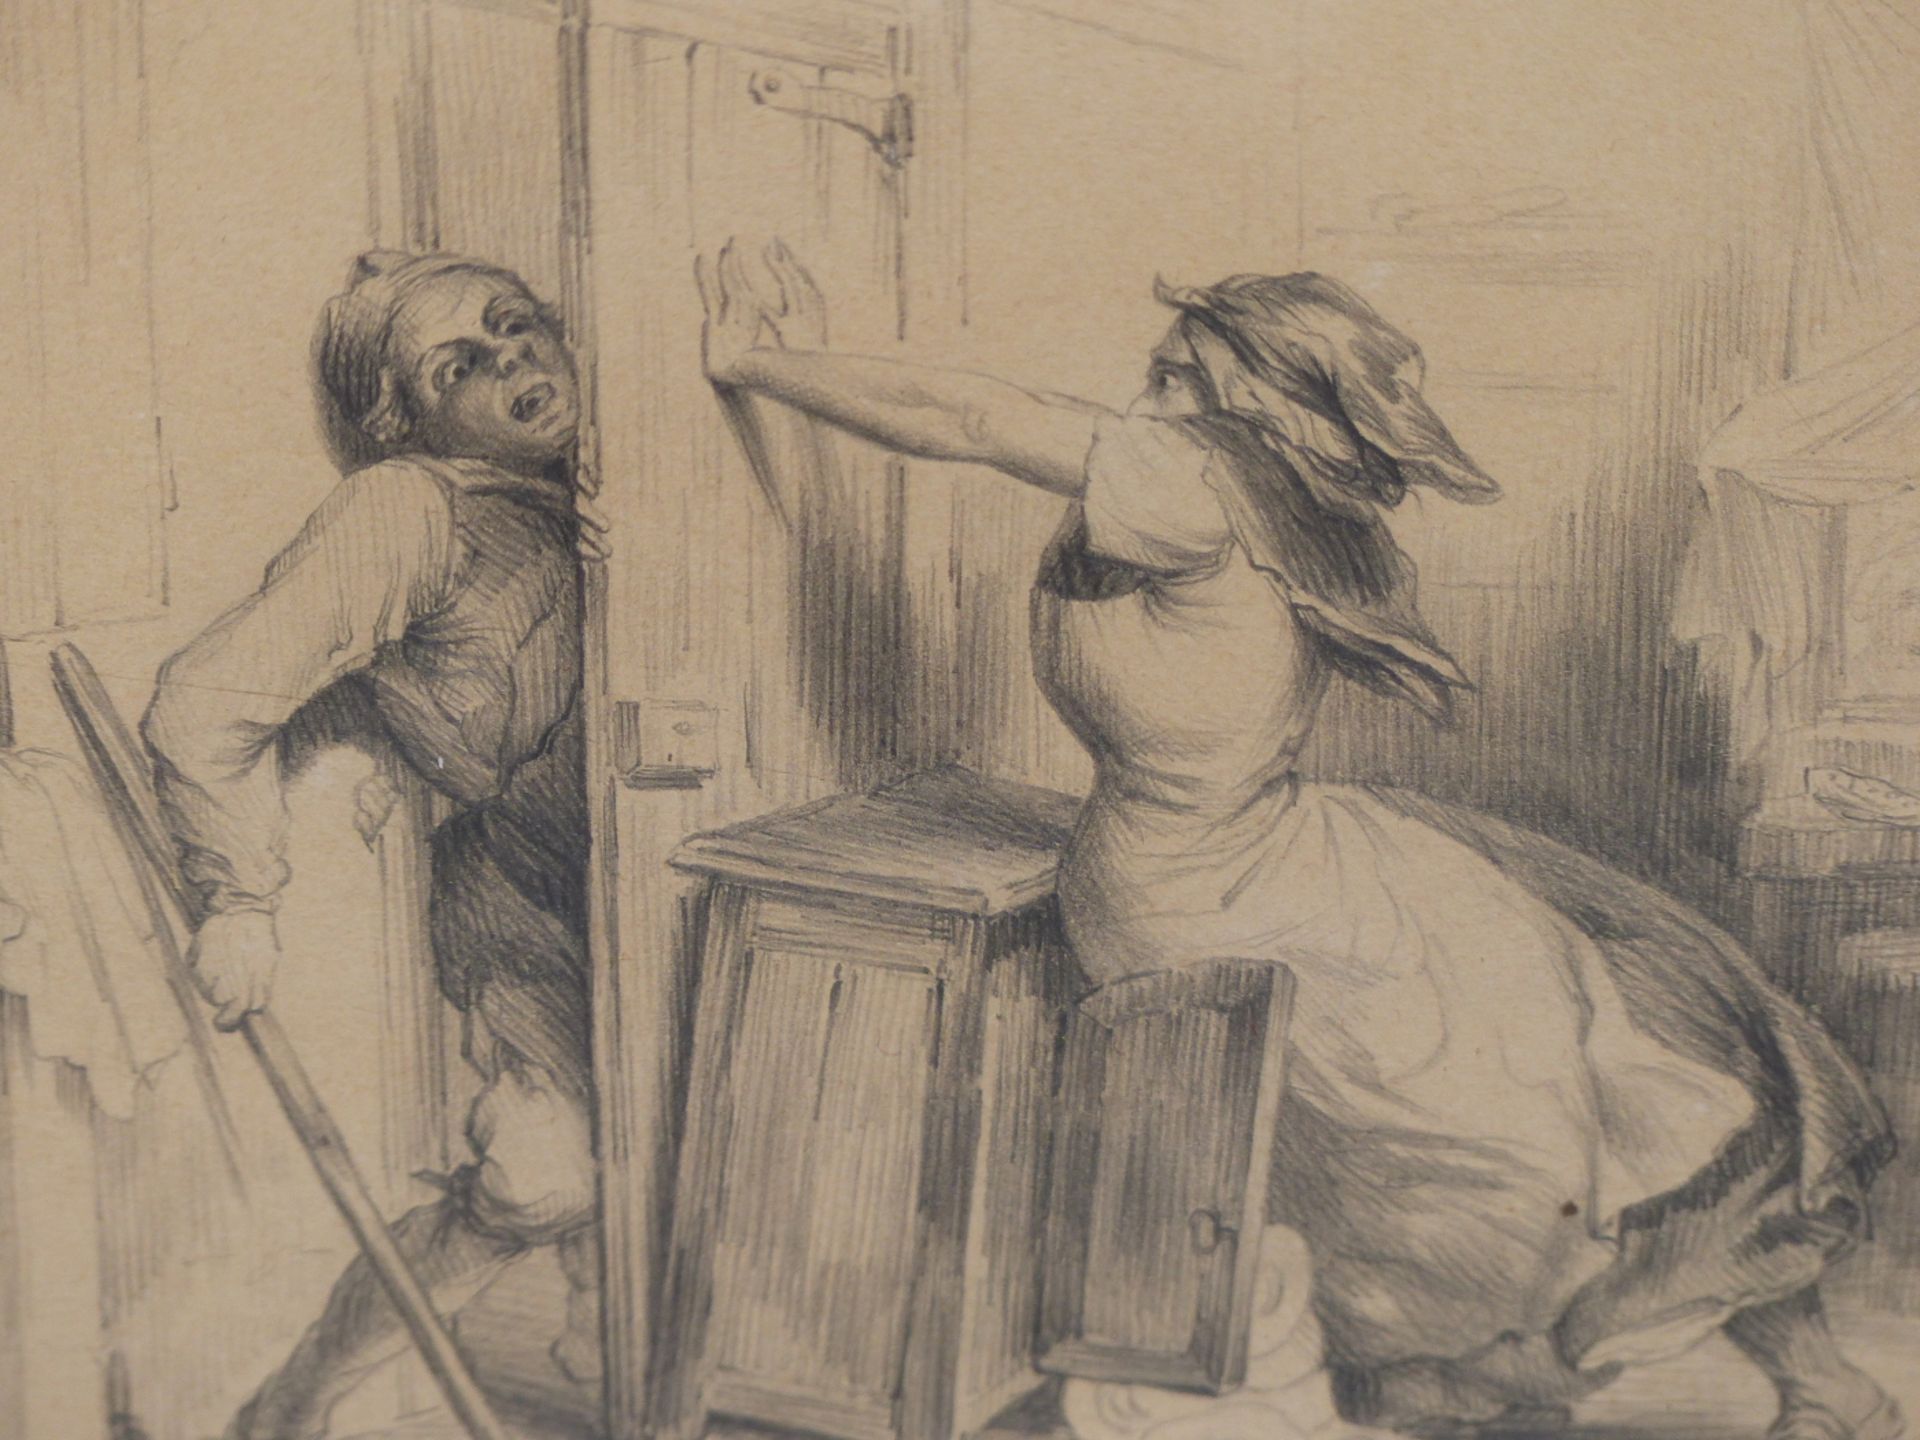 C.H. (19TH CENTURY FRENCH SCHOOL) THE FIGHT. PENCIL ON PAPER. SIGNED L/R 14 X 18 cm - Image 2 of 5